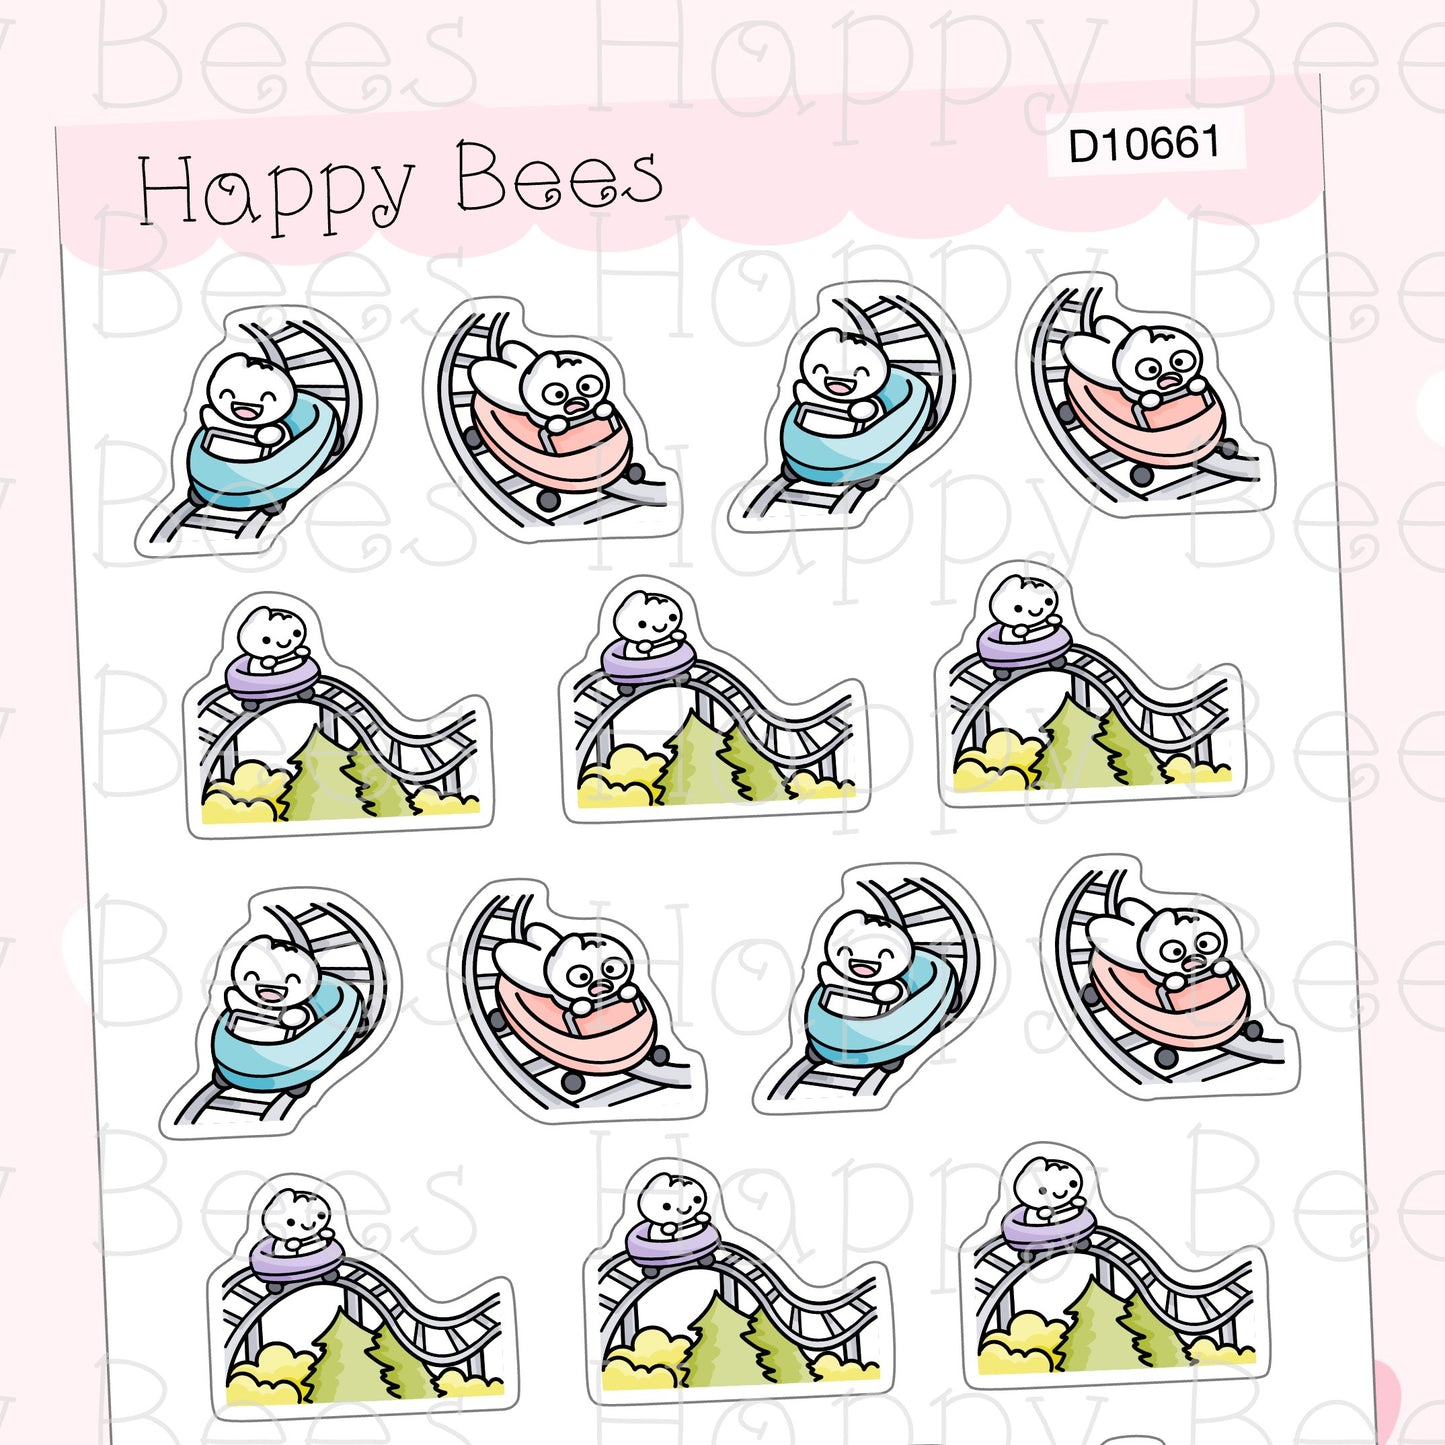 Emotional Rollercoaster - Cute Doodles Self Care Planner Stickers D10661